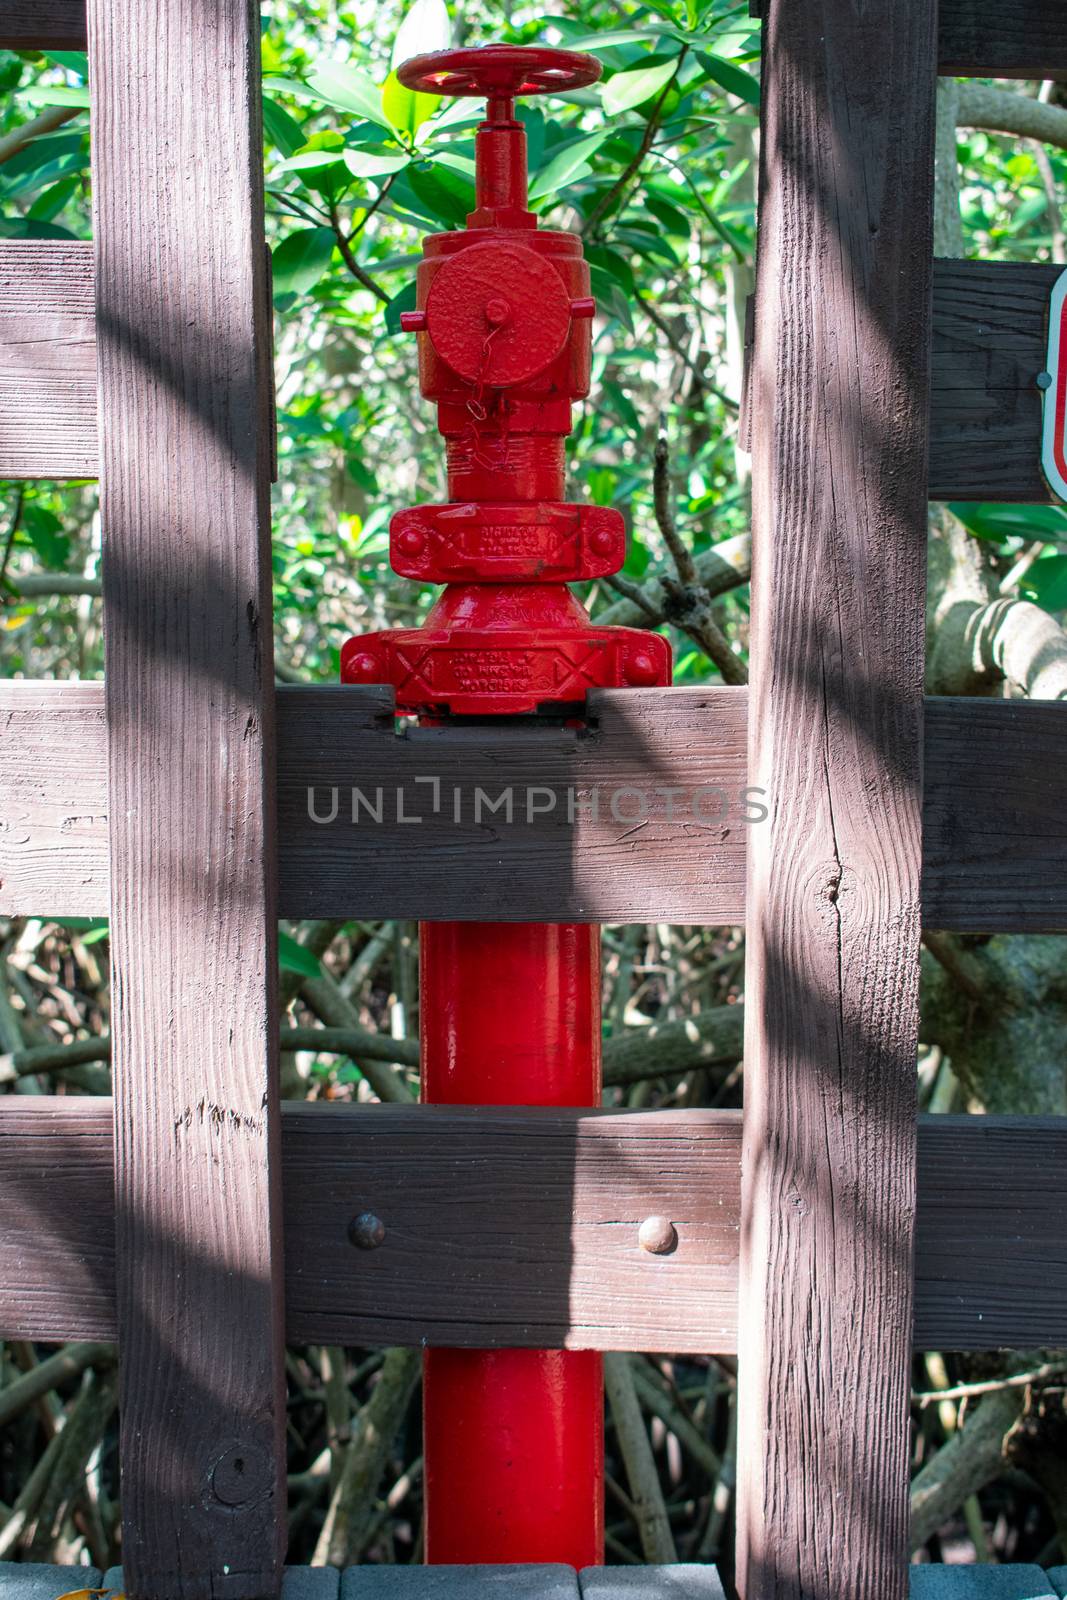 A Bright Red Fire Hydrant on a Boardwalk in a Lush Green Forest